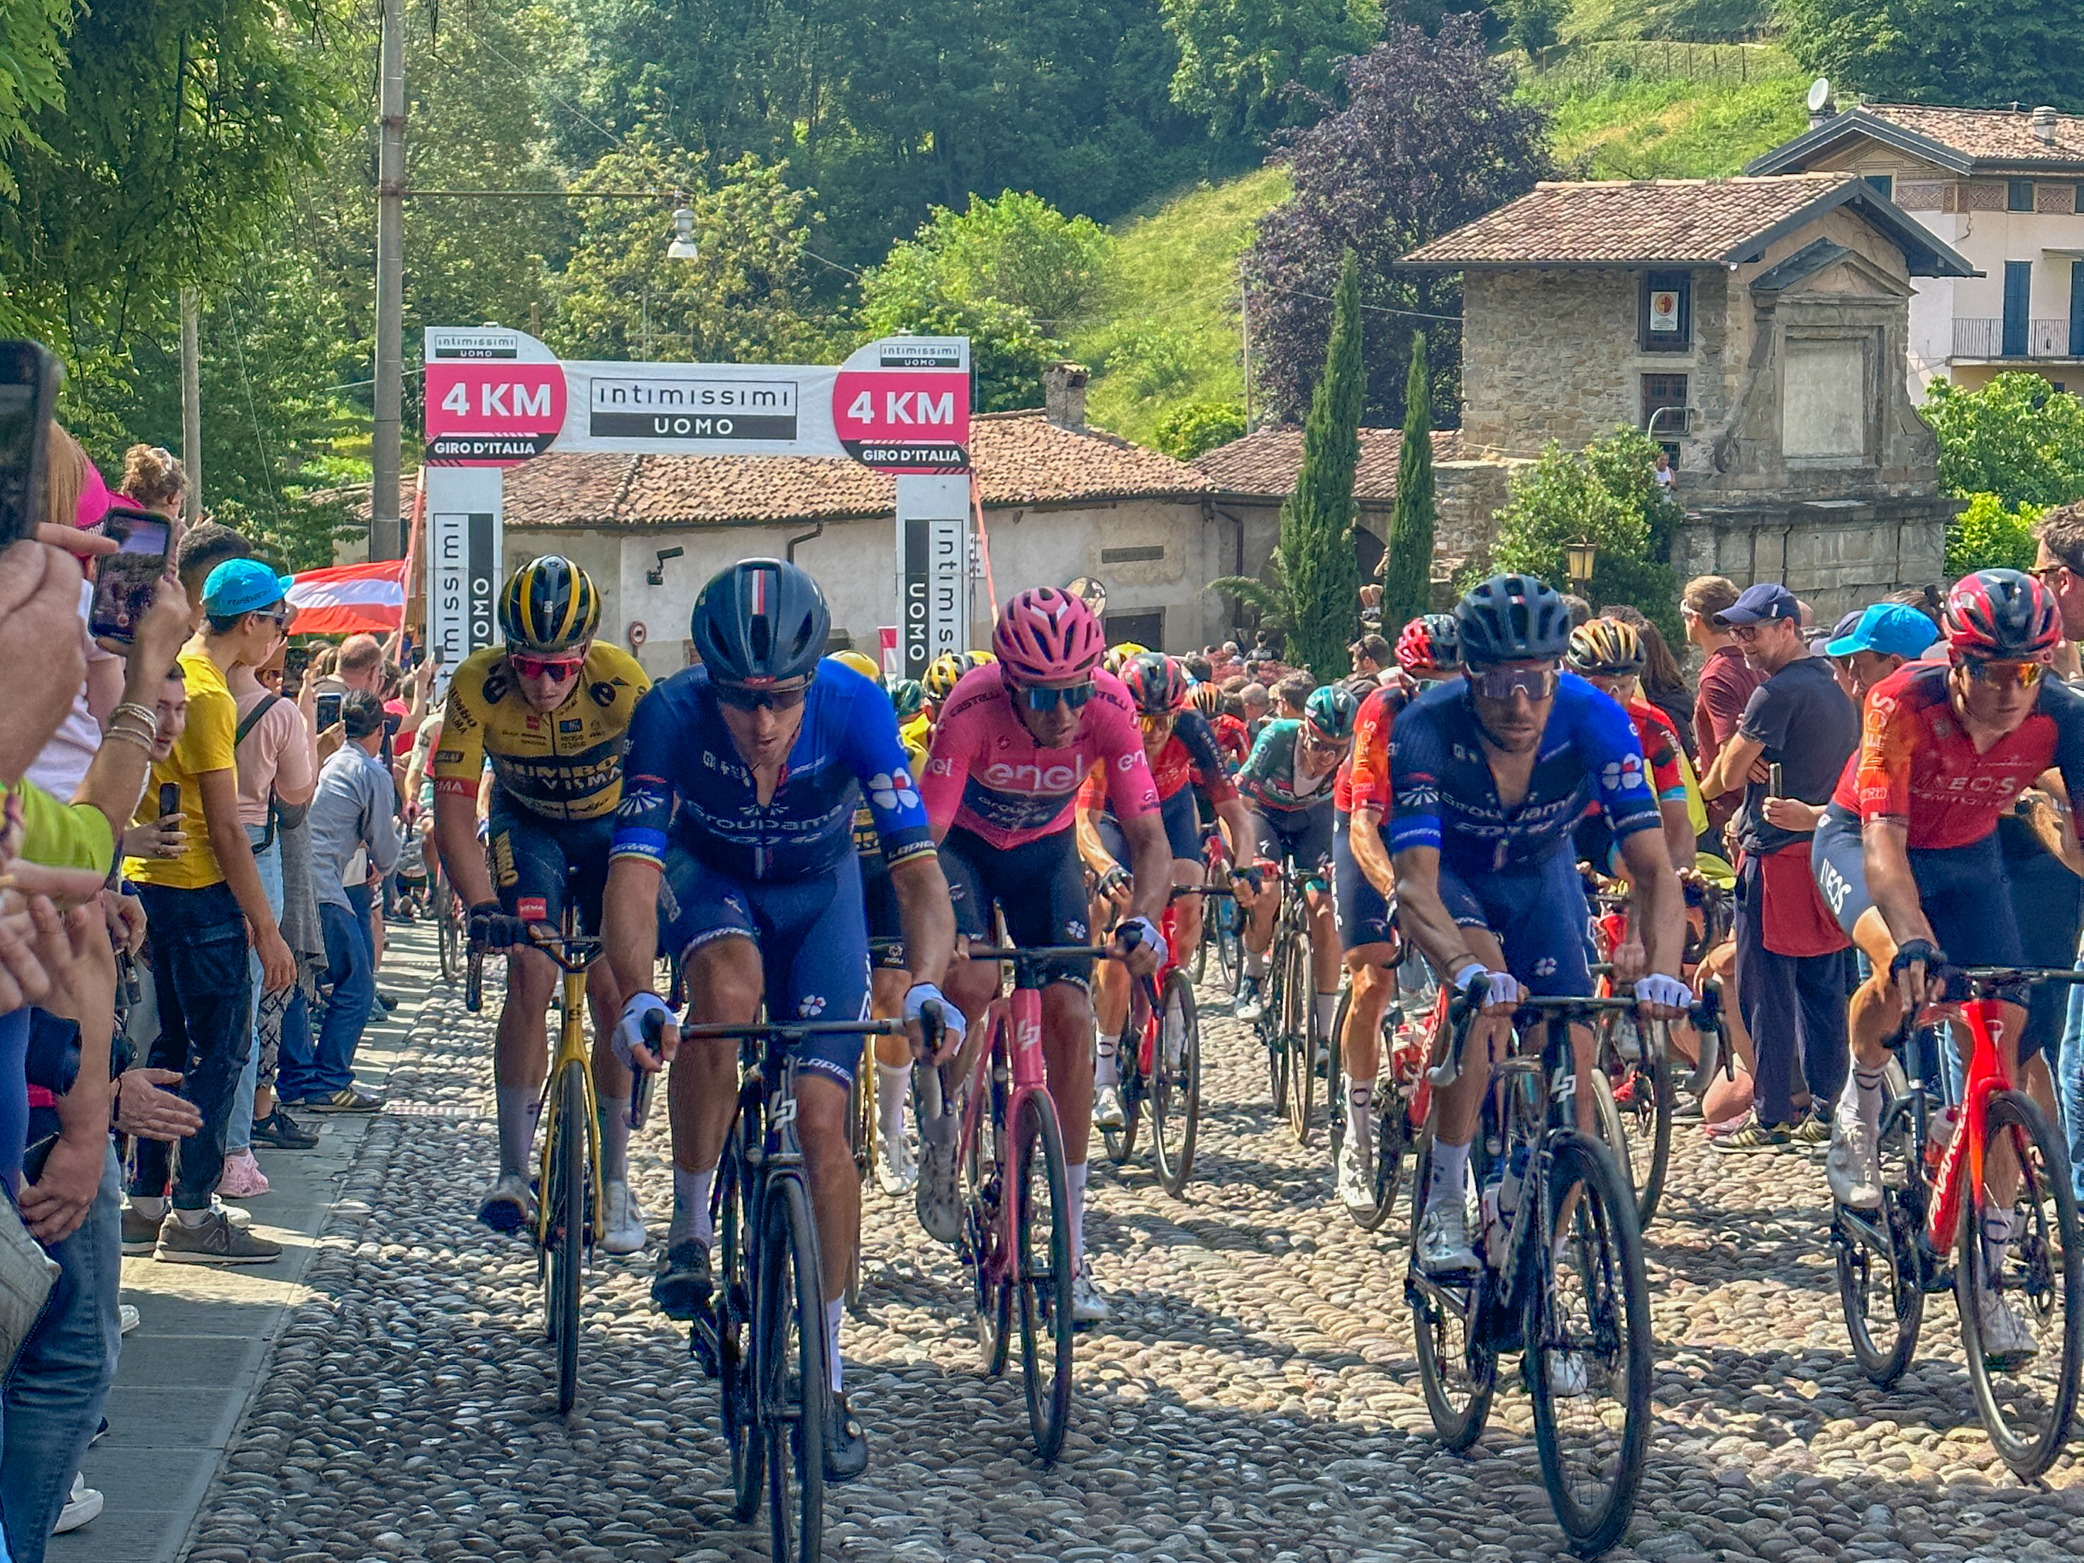 The pink jersey and other cyclists racing in the Giro d'Italia on the outskirts of Bergamo